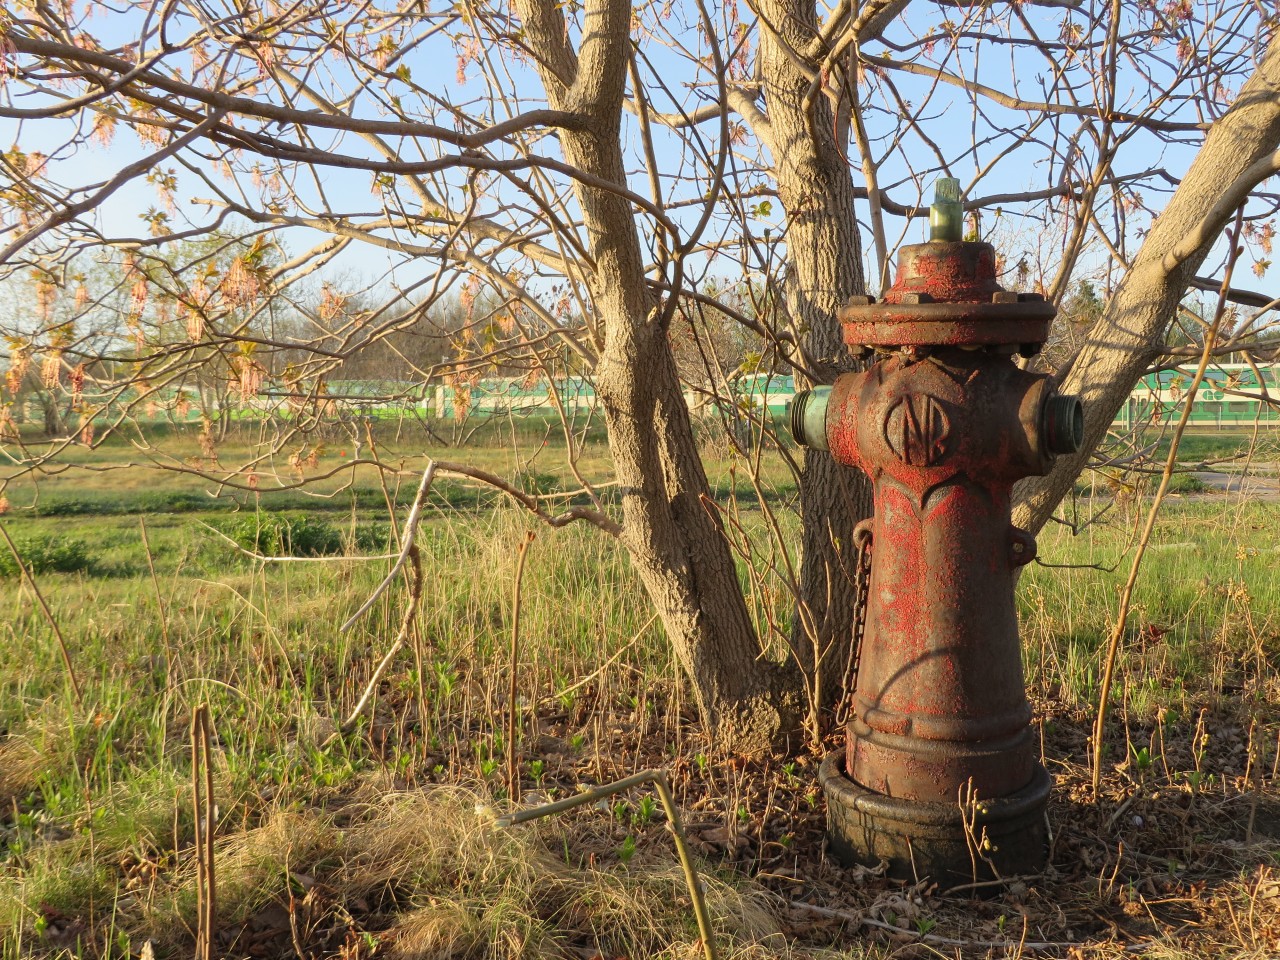 Tucked in the trees to to the south of Barrie's Southshore Community Centre, this fire hydrant would have protected the Allandale roundhouse and the adjacent master mechanics office. Whats left of the Allandale yard is now used by GO Transit. Part of the Roundhouse floor remains behind the hydrant. The master mechanics office was saved and became the front portion of the community centre in 1994. As part of the renovations, We had the fire department hook up to the hydrant to see if it could be used in the reno. As water sprayed out of all sorts of places in the basement, we concluded it was not a good idea!